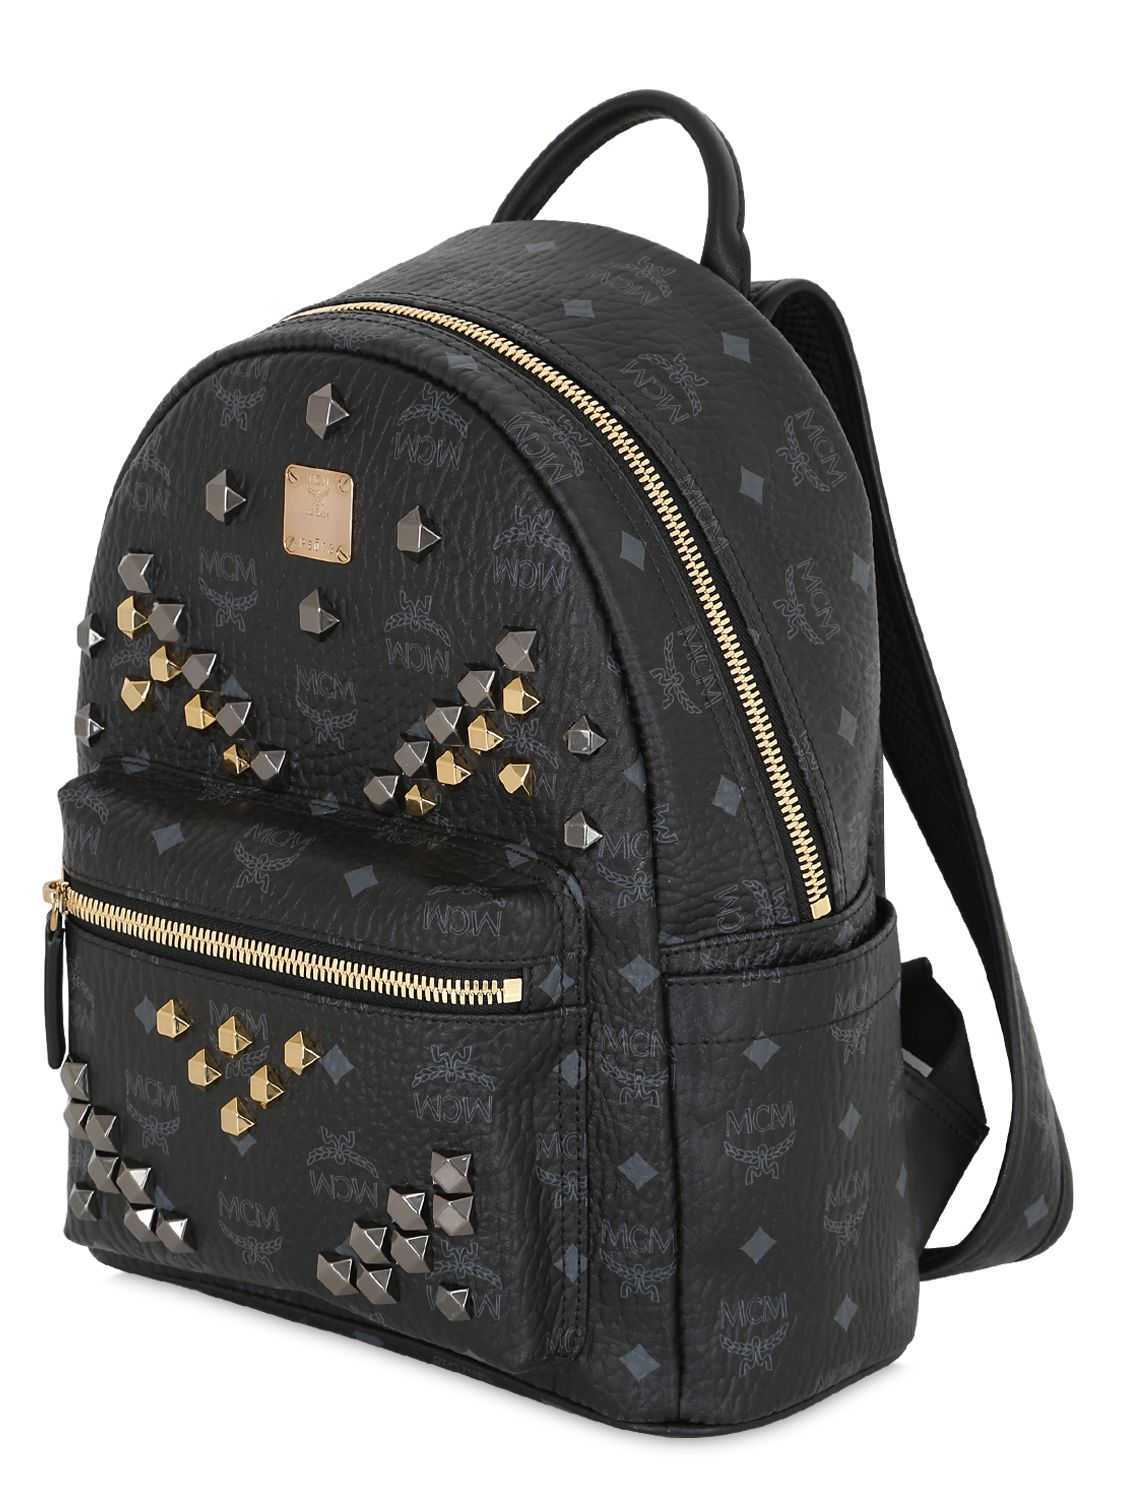 Lyst - Mcm Small Stark Faux Leather Backpack in Black